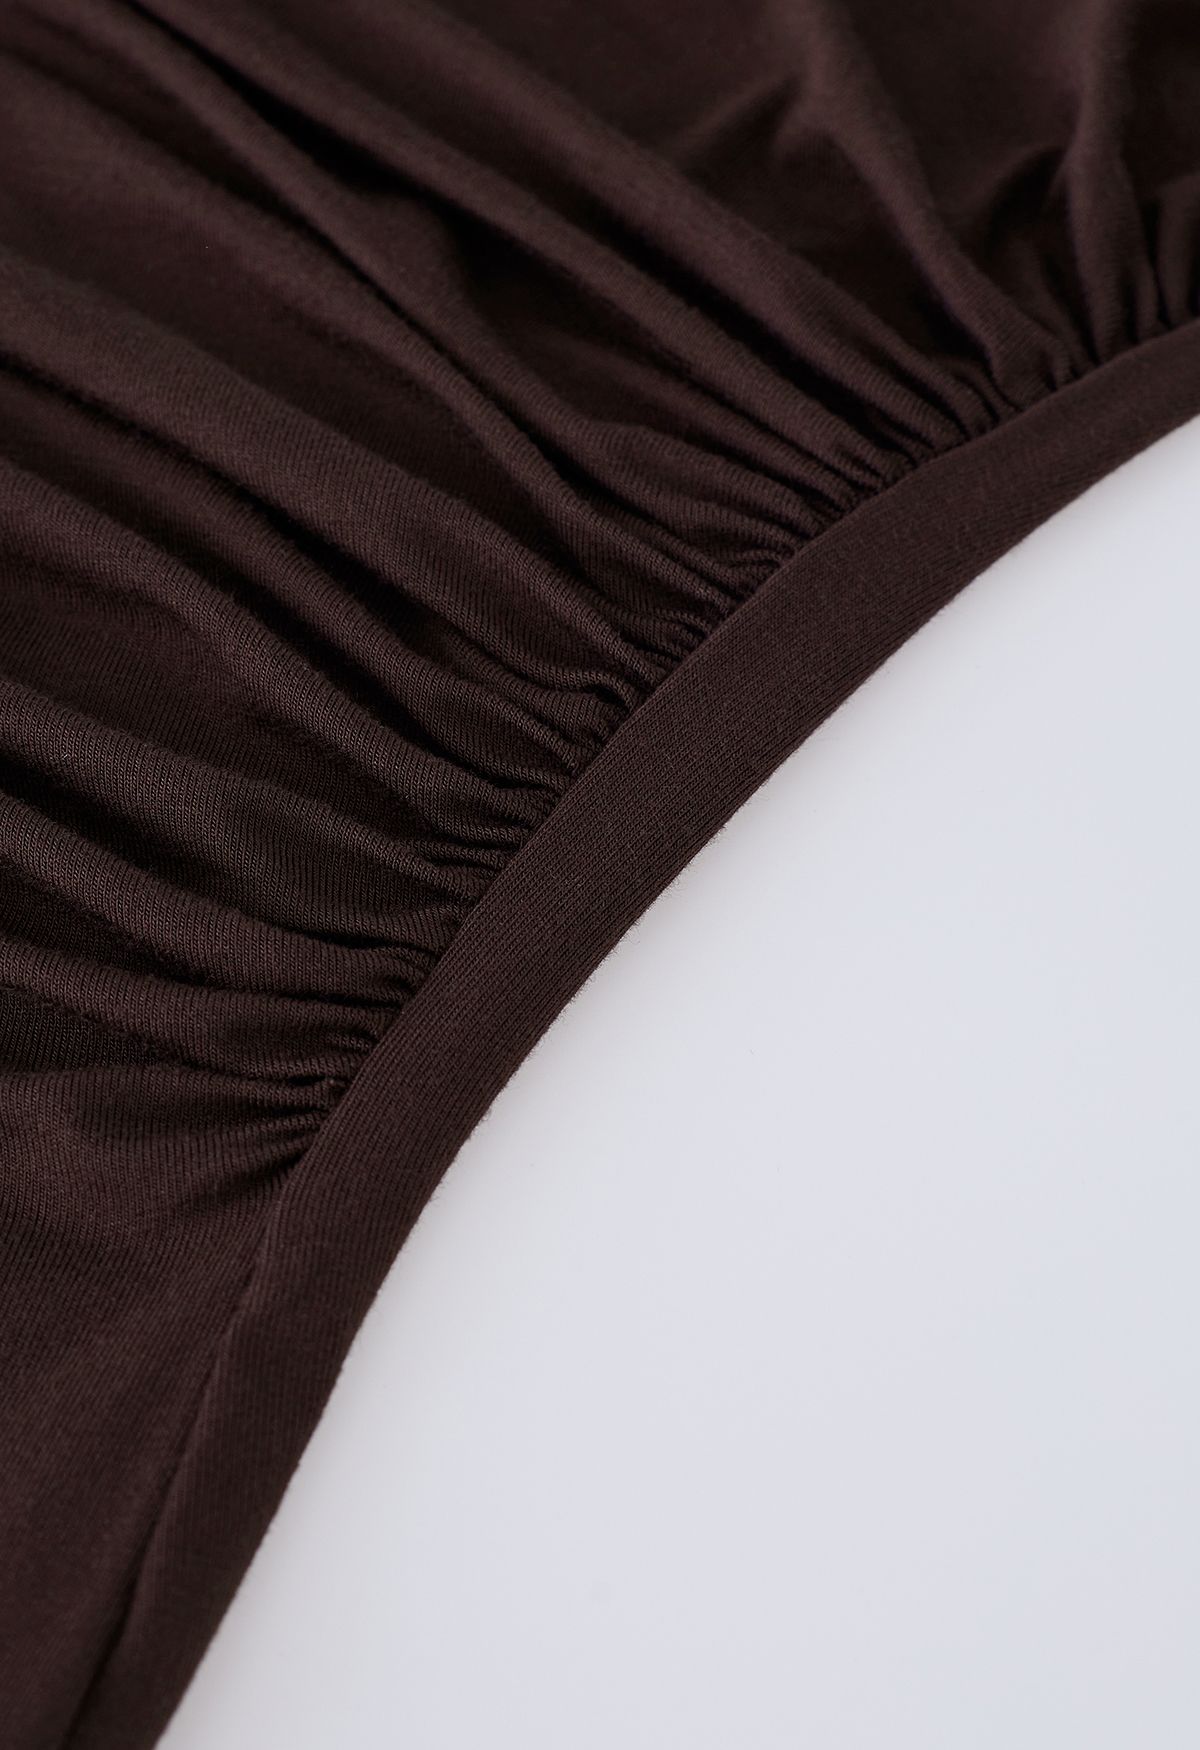 Ruched Detail Sleeveless Top in Brown